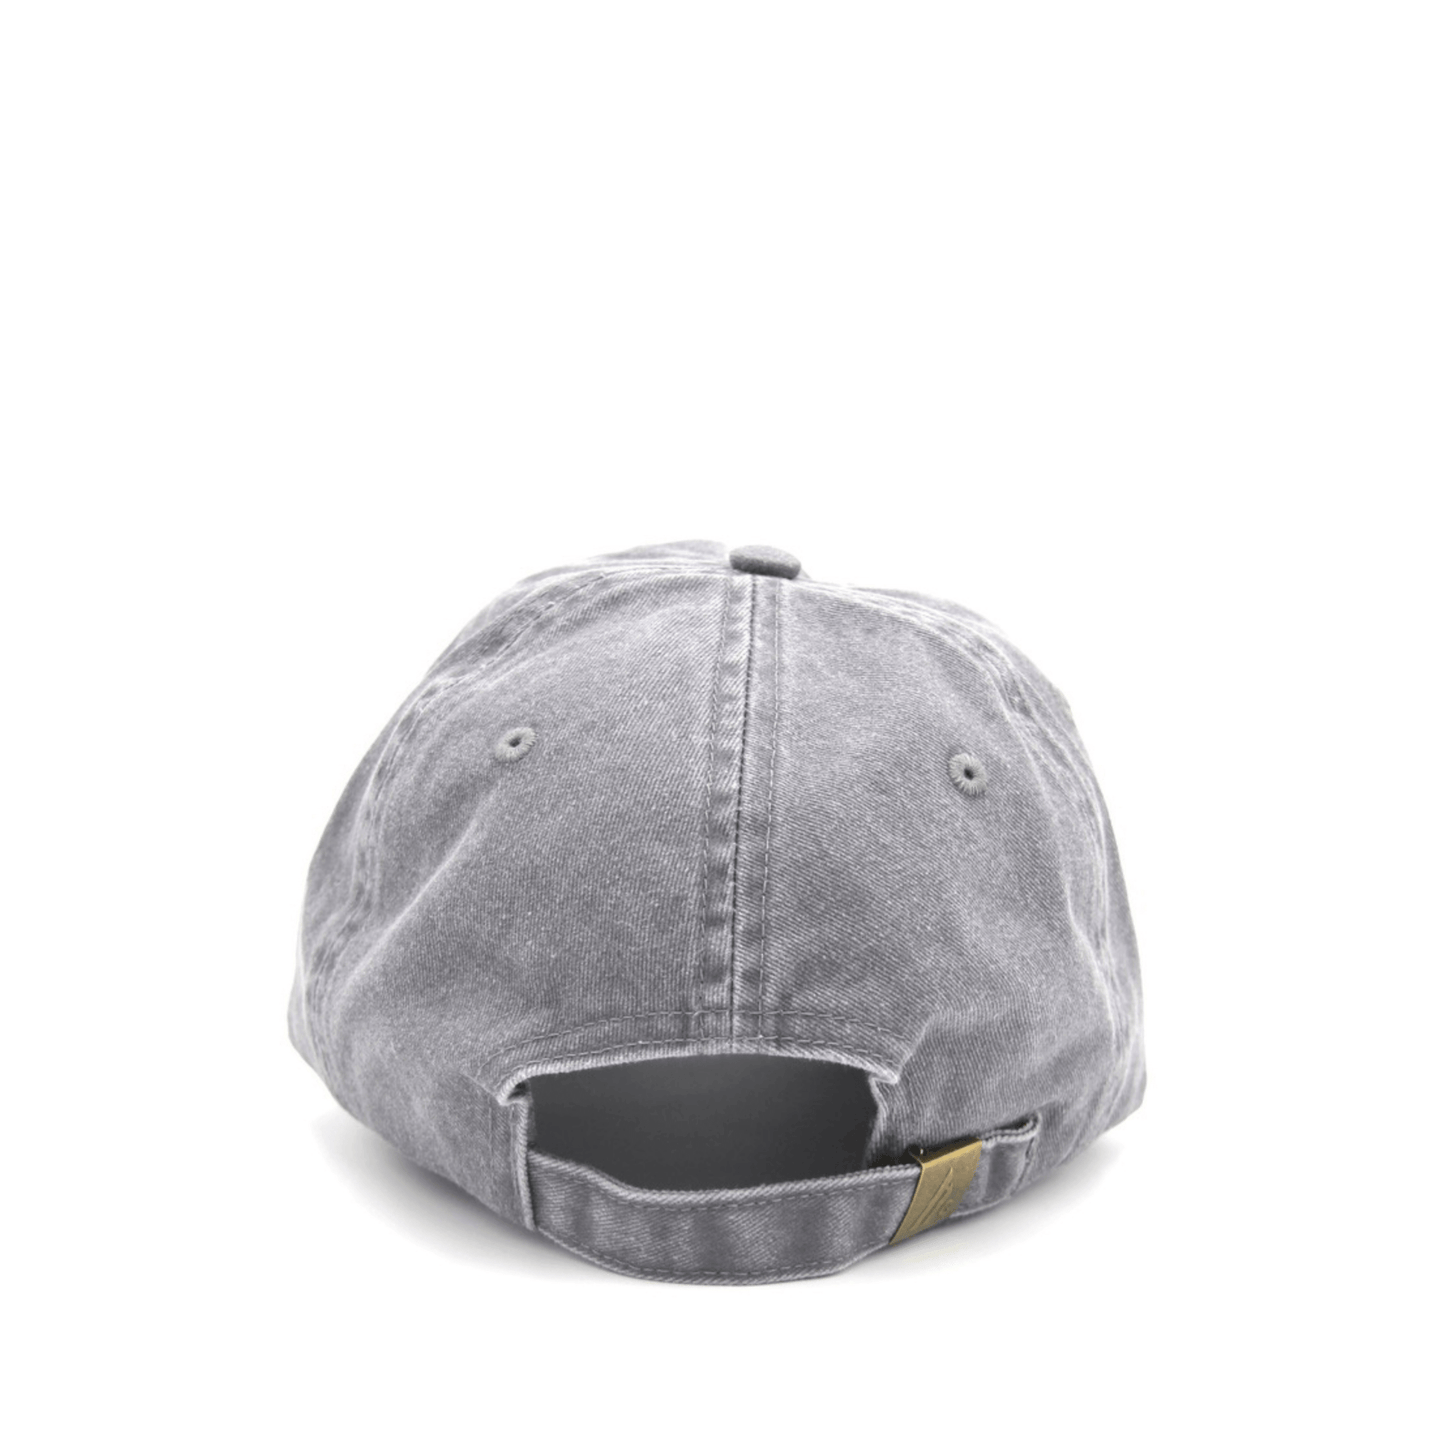 Know Your Worth Cap Wear The Peace Dad Caps Washed Light Gray